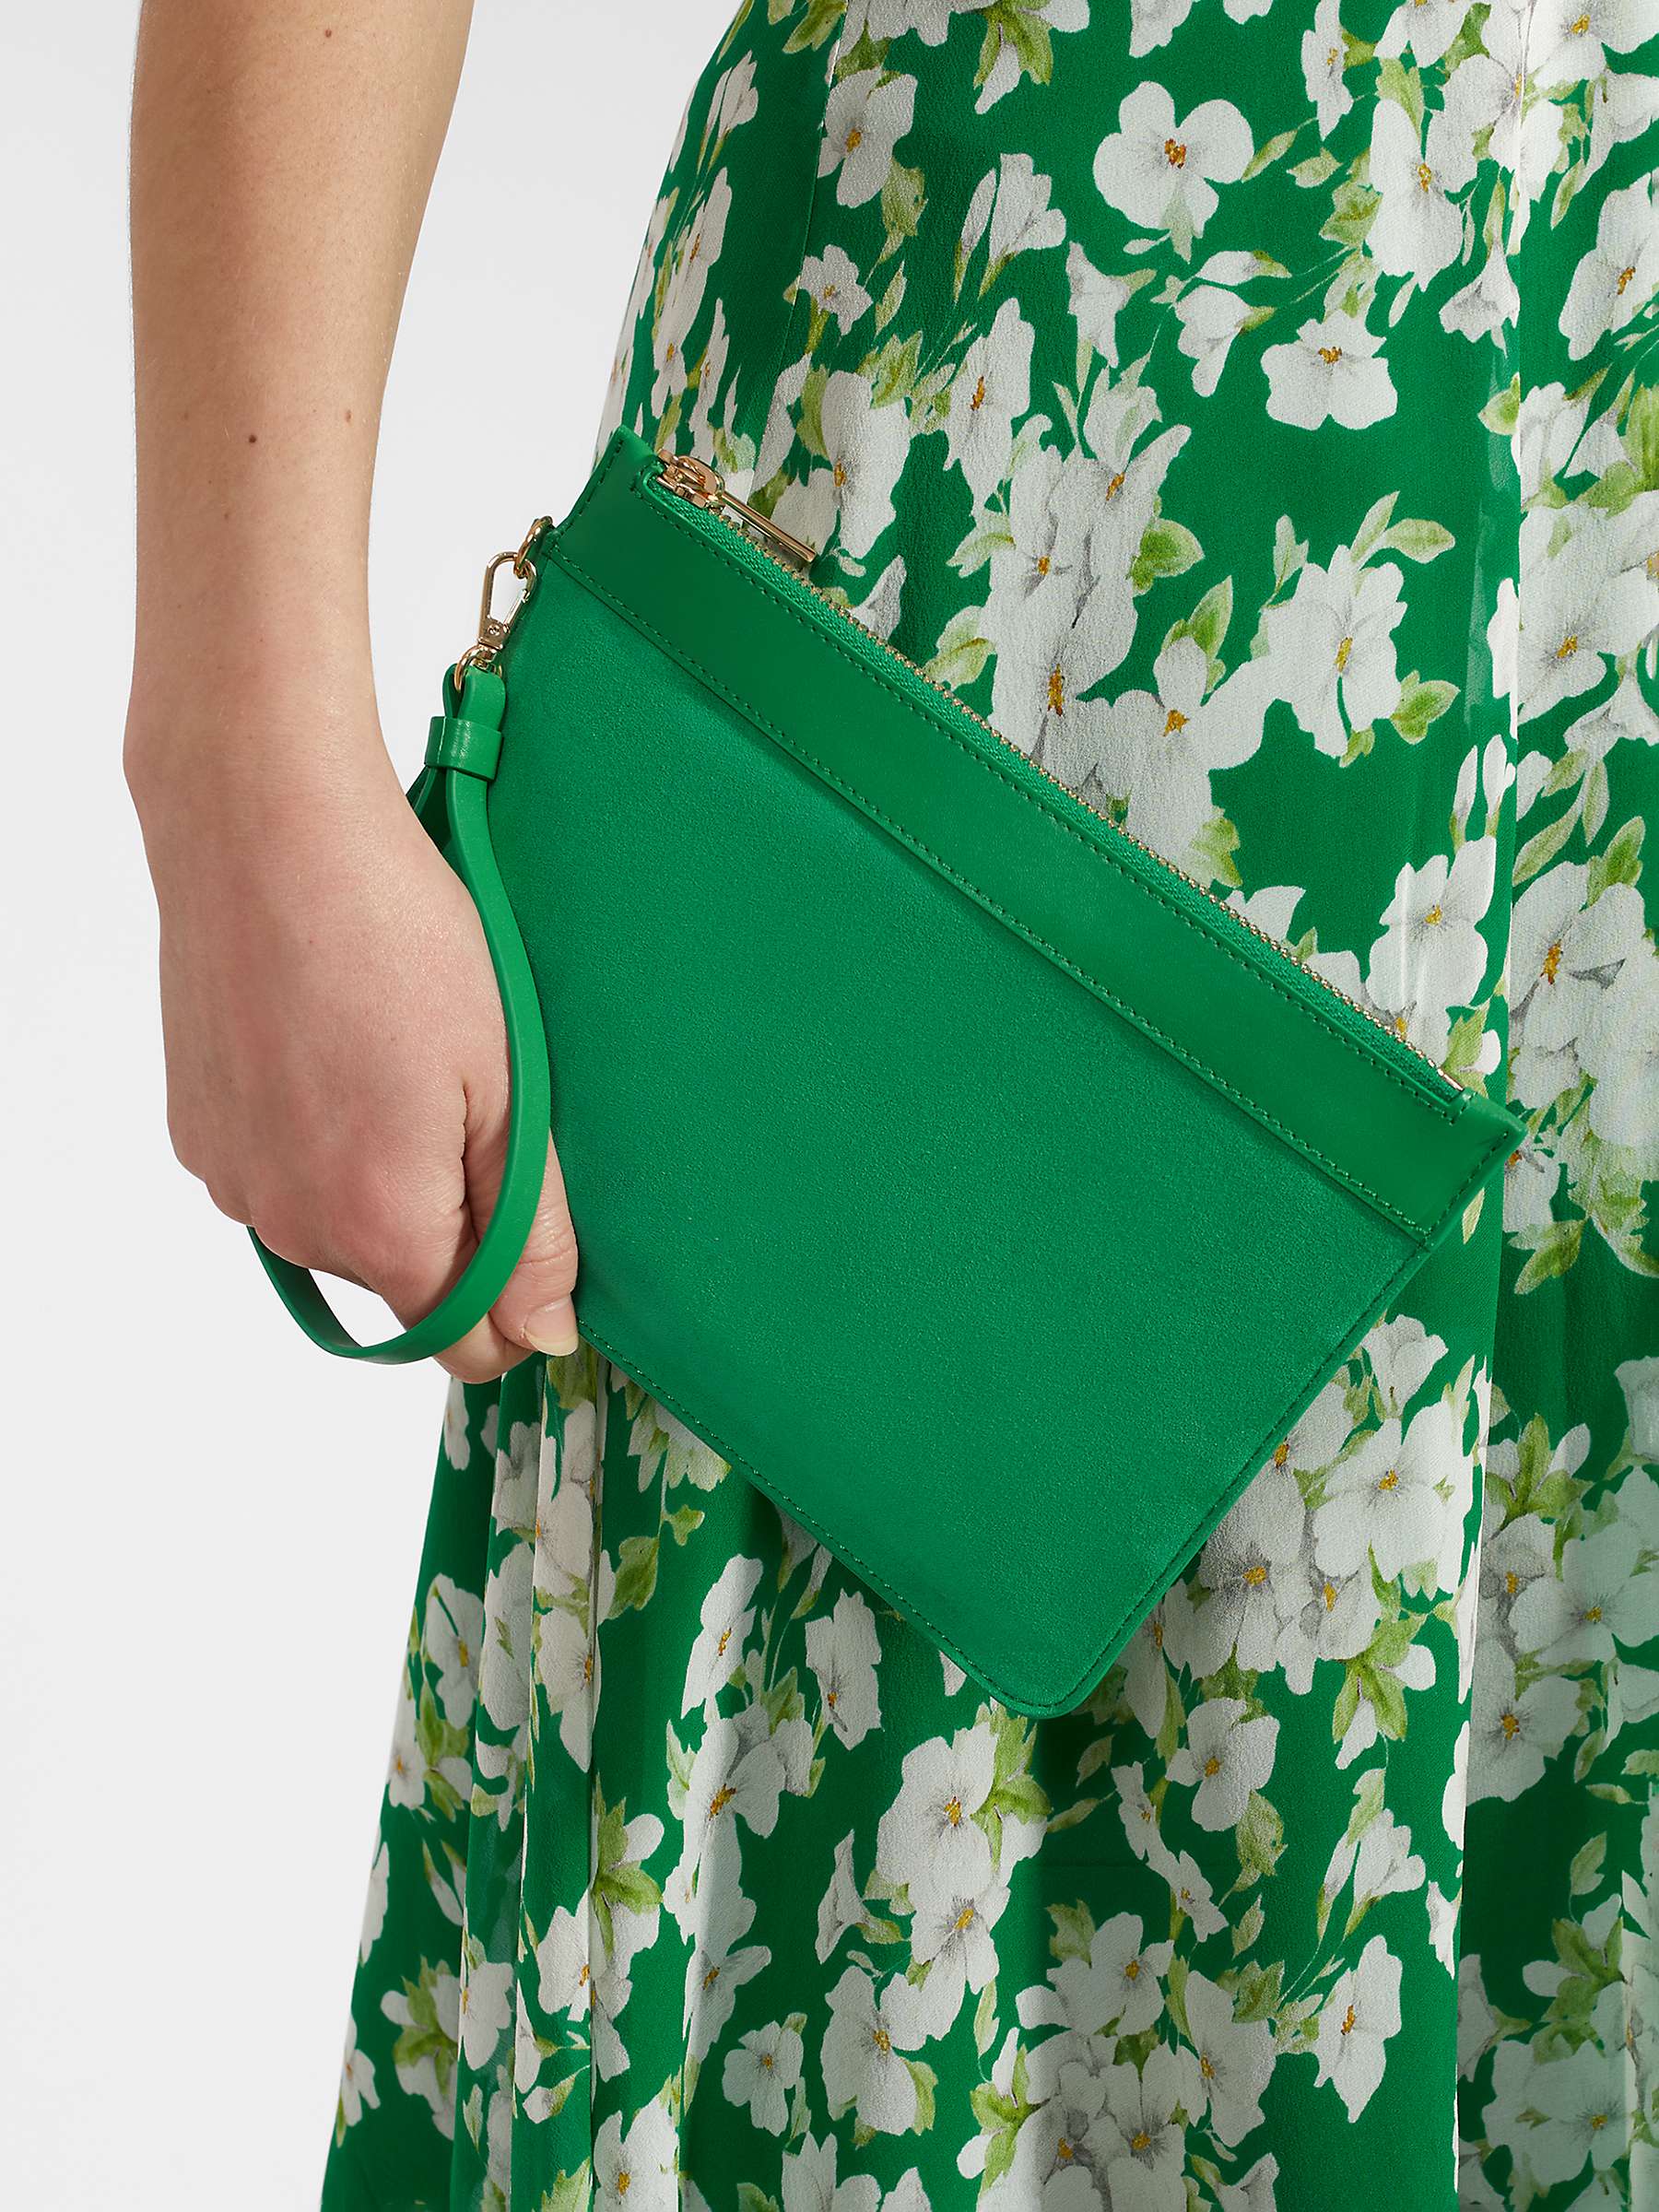 Buy Hobbs Lundy Leather Wristlet, Cilantro Green Online at johnlewis.com